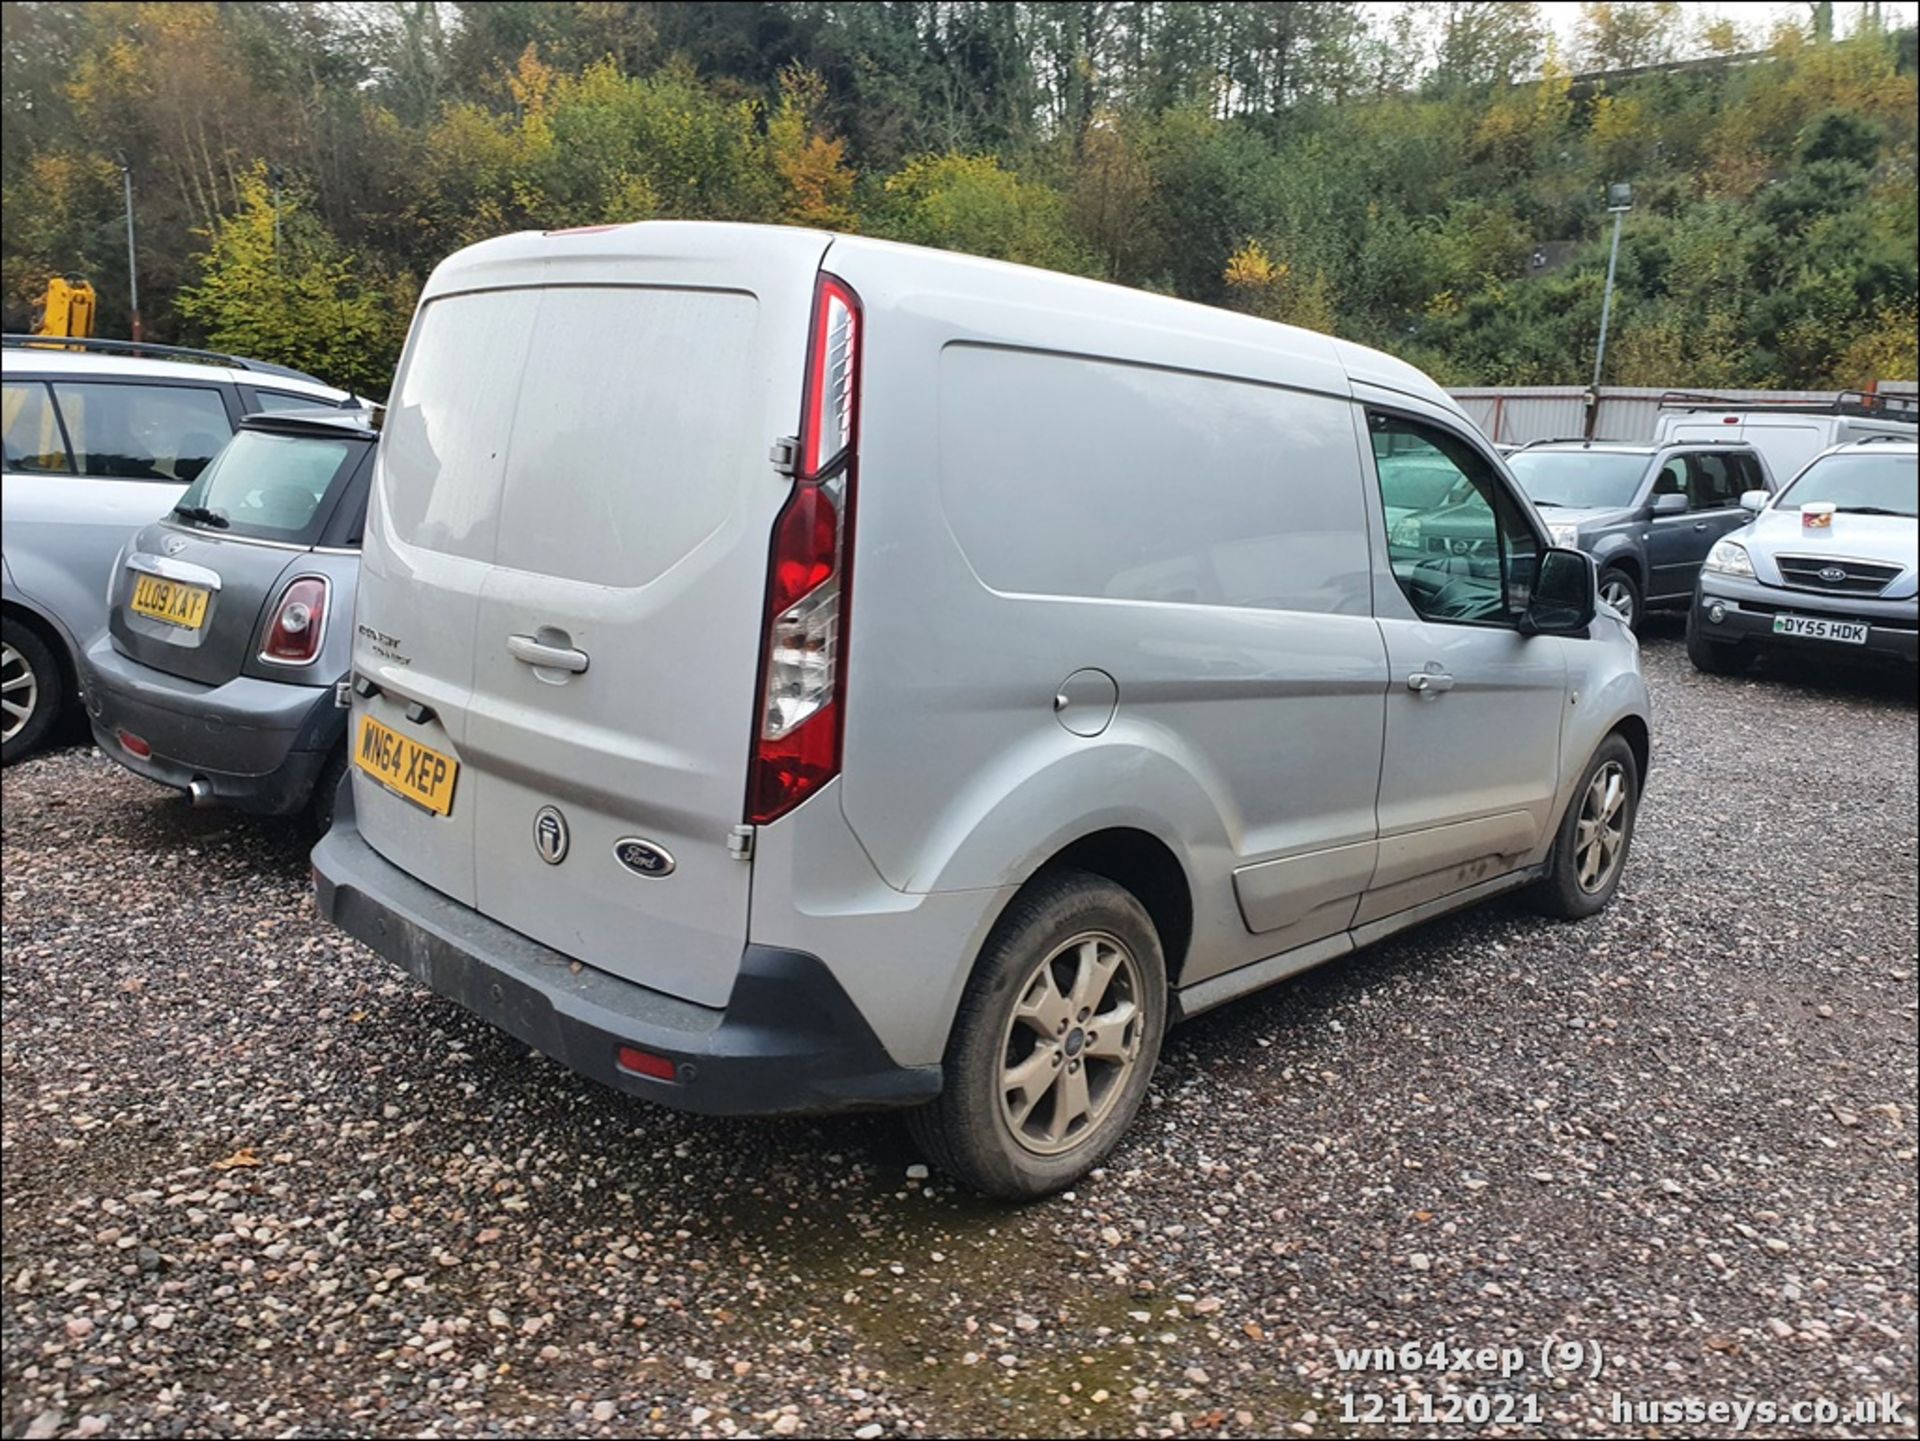 14/64 FORD TRANSIT CONNECT 200 LIMIT - 1560cc 5dr Van (Silver, 82k) - Image 9 of 27